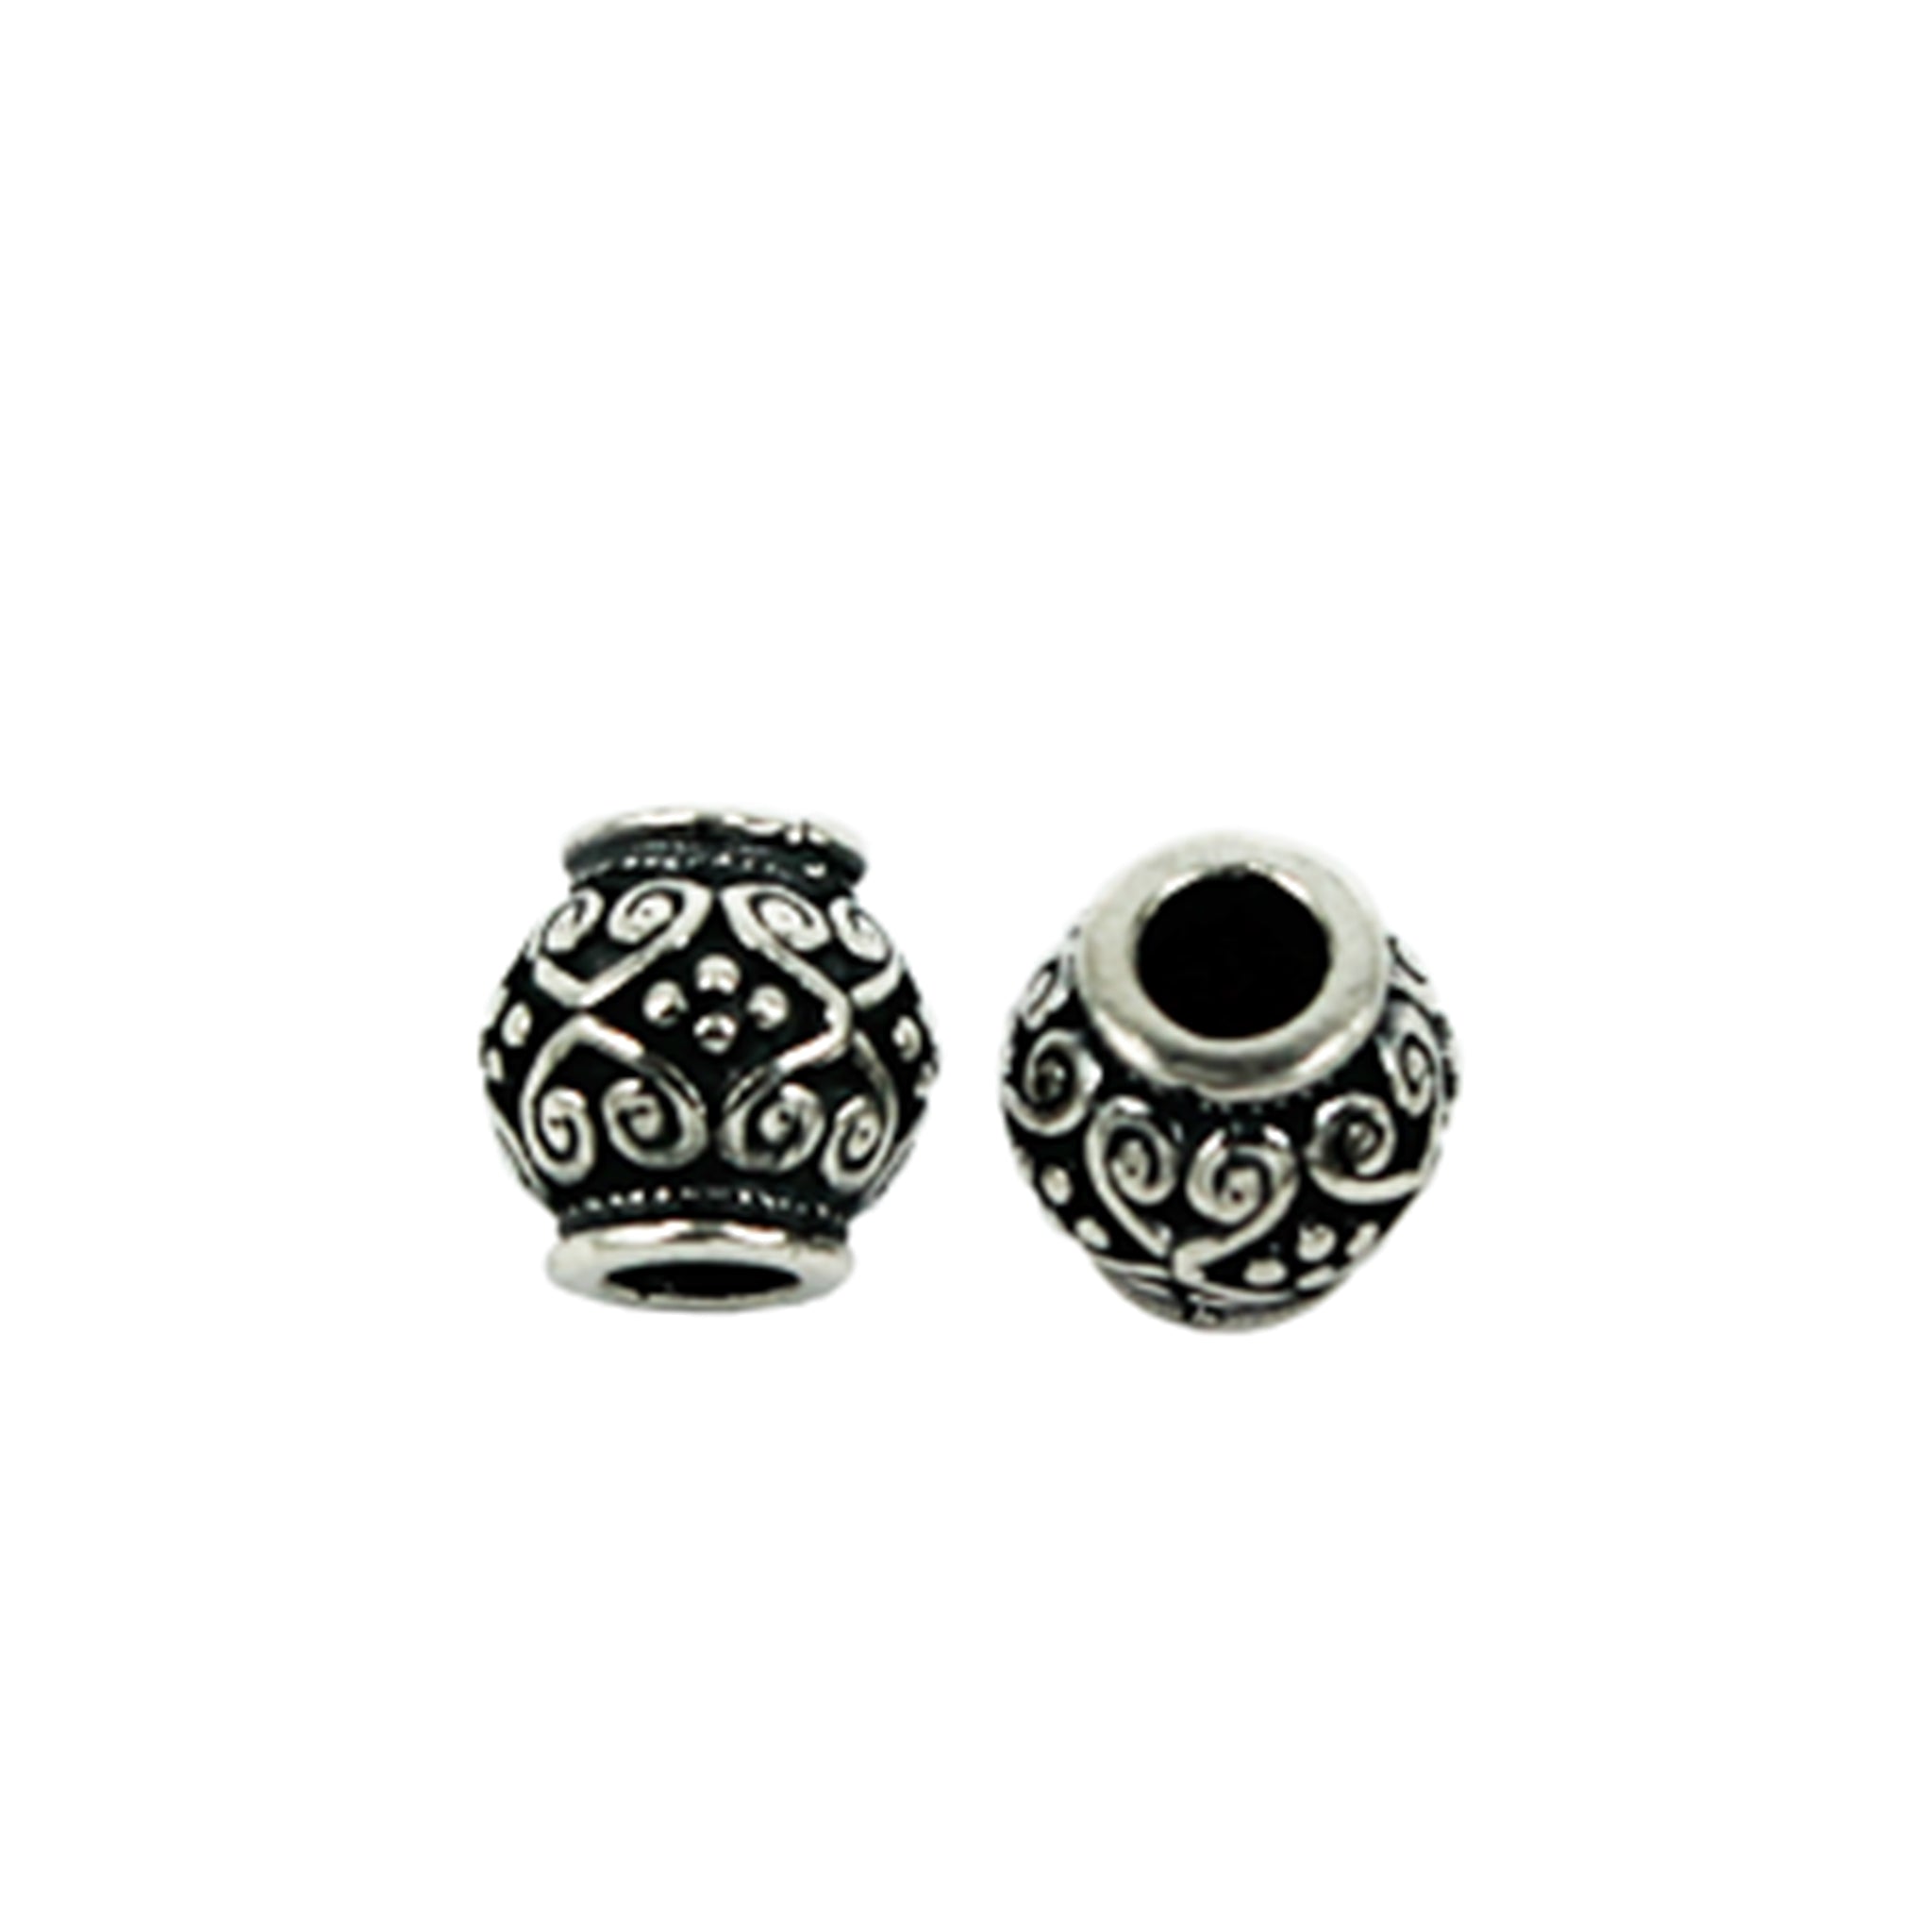 Round Spacer Bead in Antique Sterling Silver 7.4x7.4x7.4mm